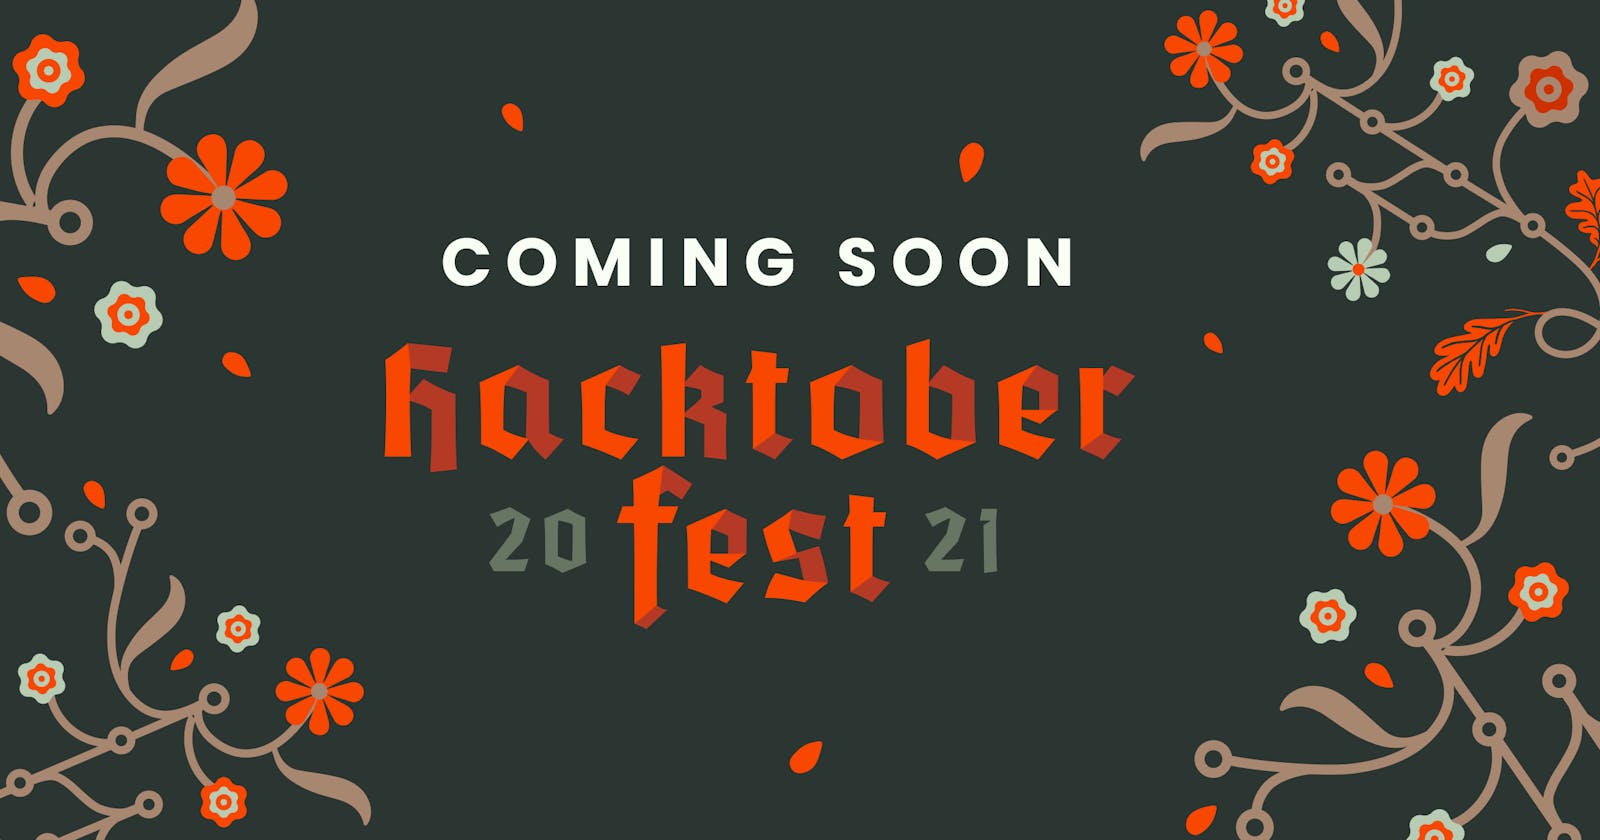 Why Hacktoberfest is one of the best ways to start with Open Source.